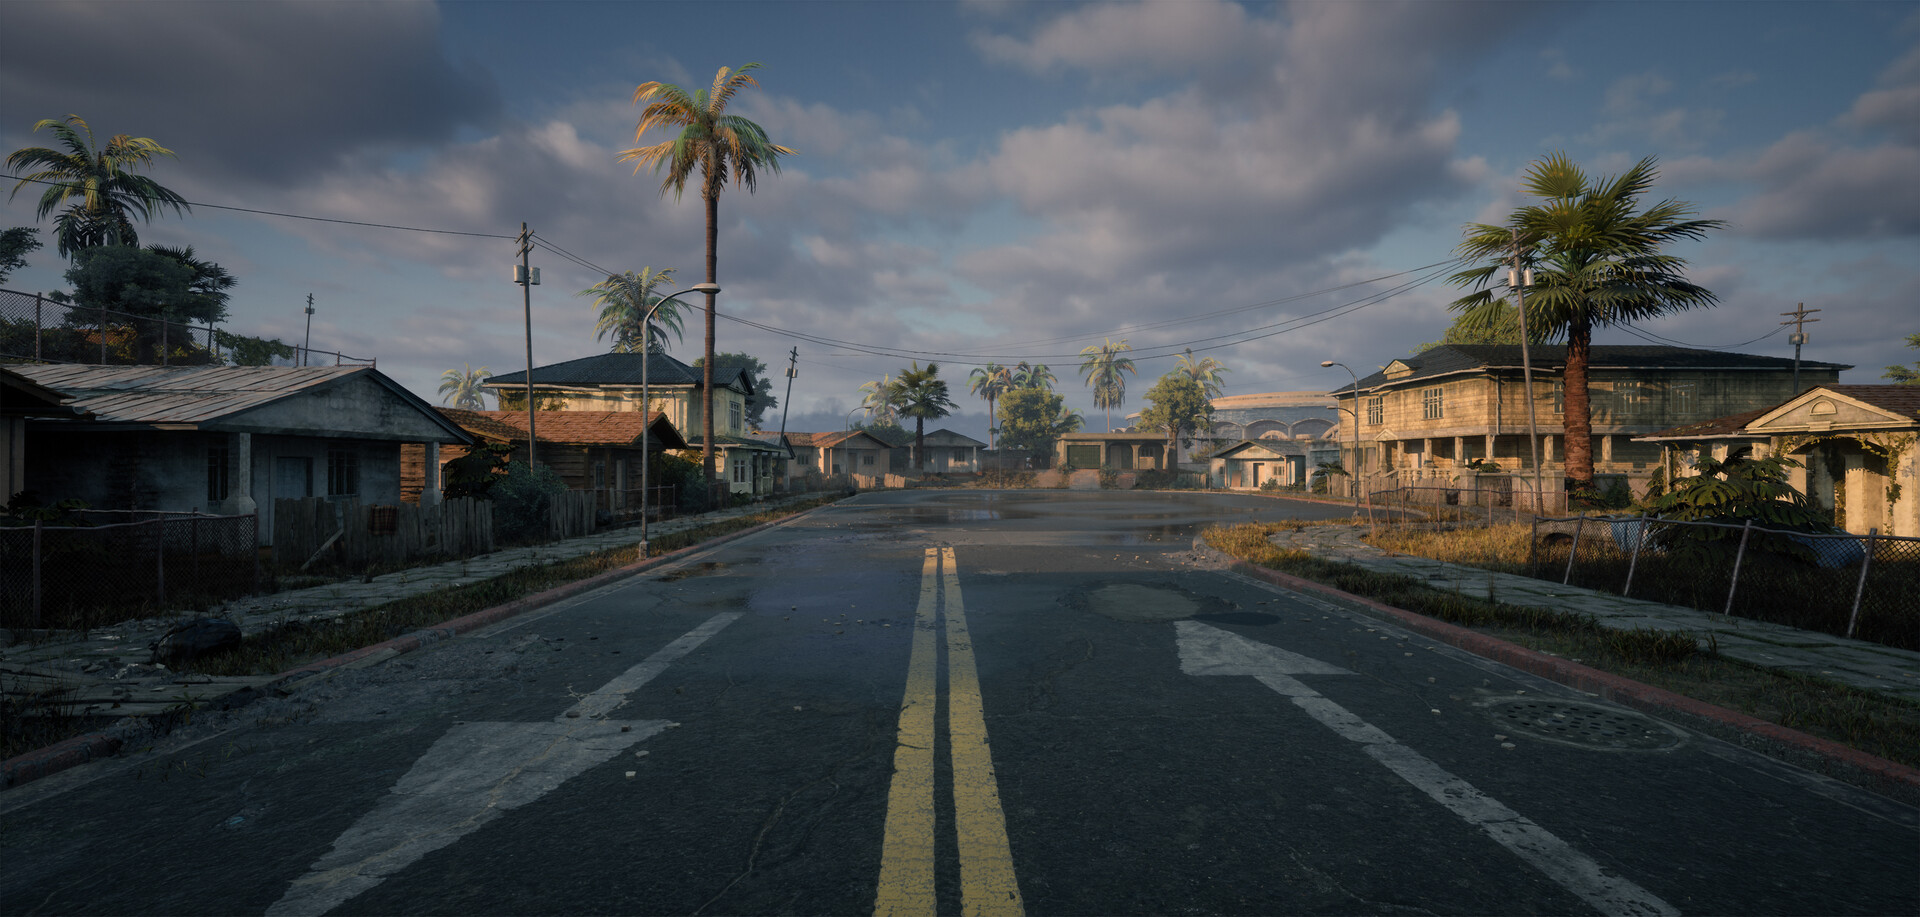 General 1920x917 Zheng Zhangming Grand Theft Auto: San Andreas CGI digital art Unreal Engine 4  clouds palm trees realistic Los Santos stadium road sign video games